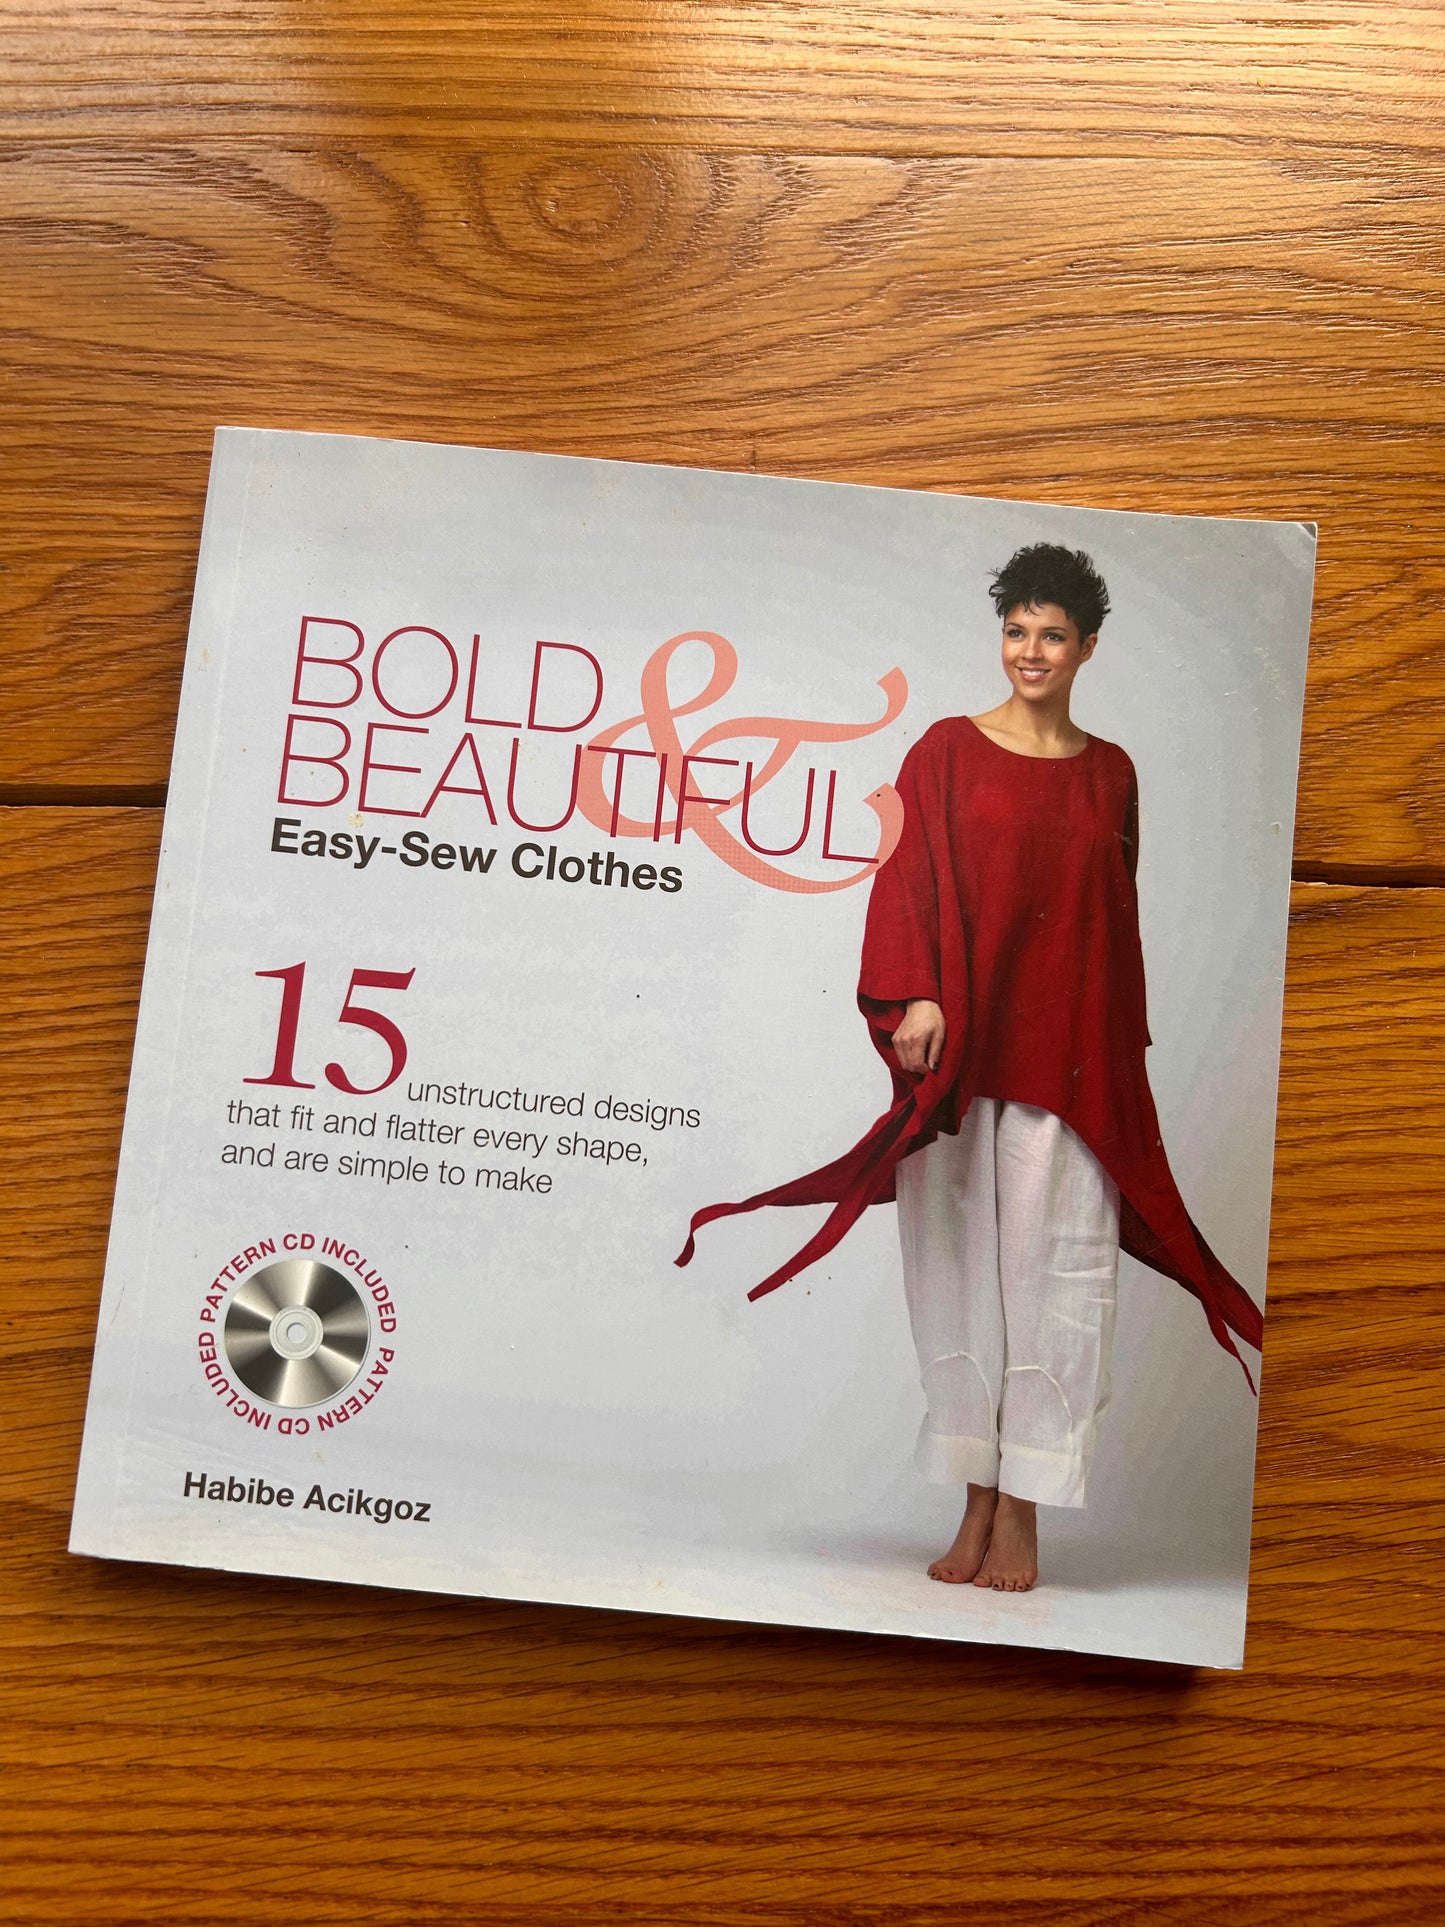 Bold & Beautiful Easy-Sew Clothes: 15 unstructured designs that fit and flatter every shape and are simple to make